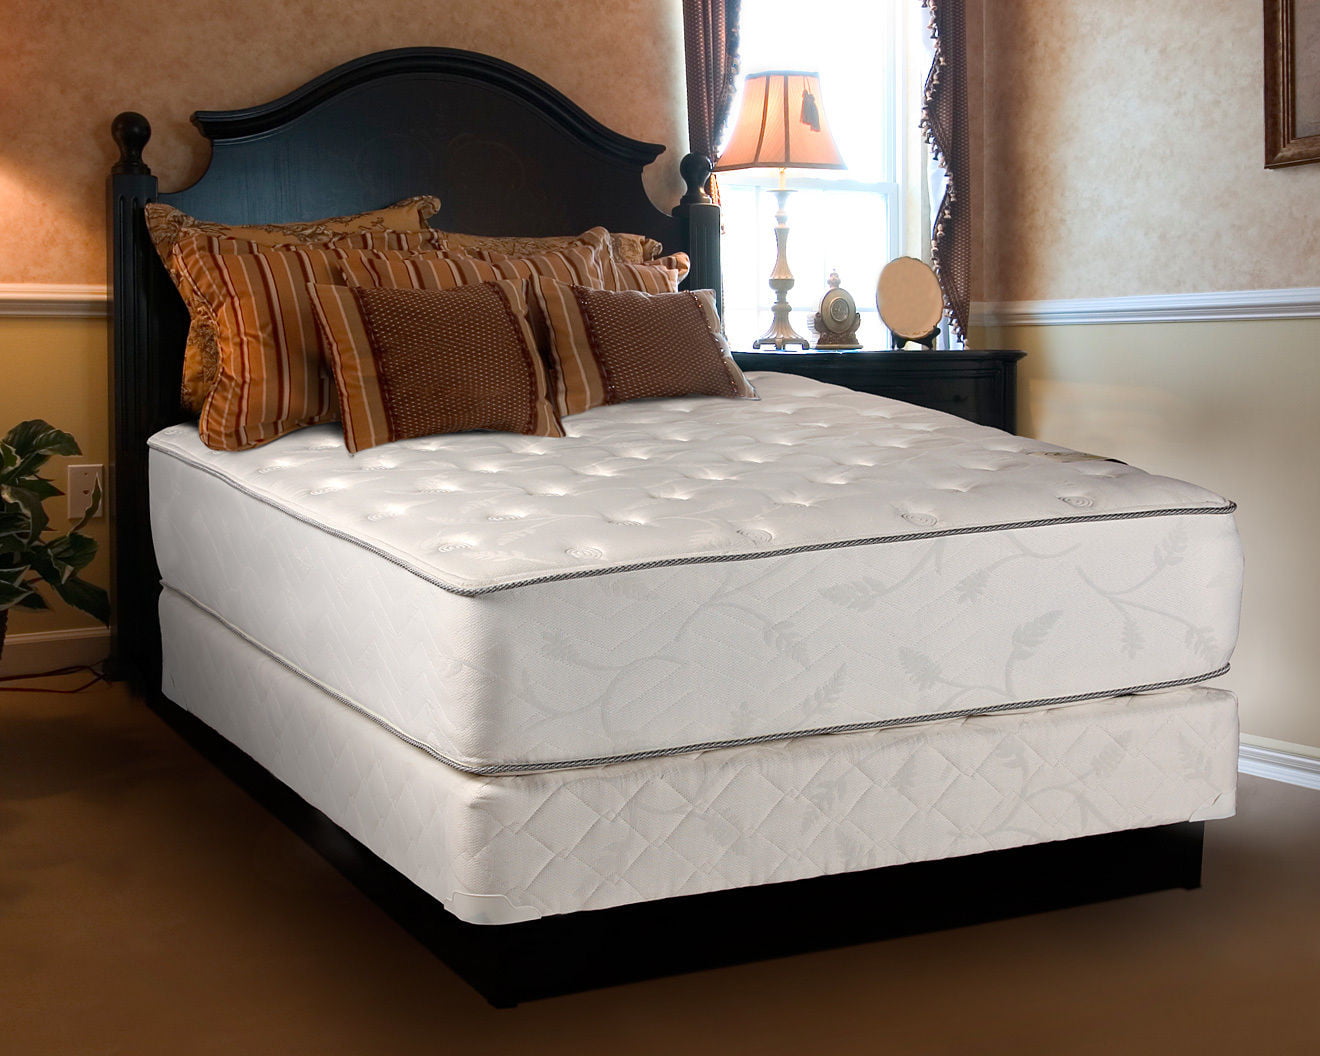 Exceptional Plush (Queen size - 60"x80"x12") Two-Sided Mattress set